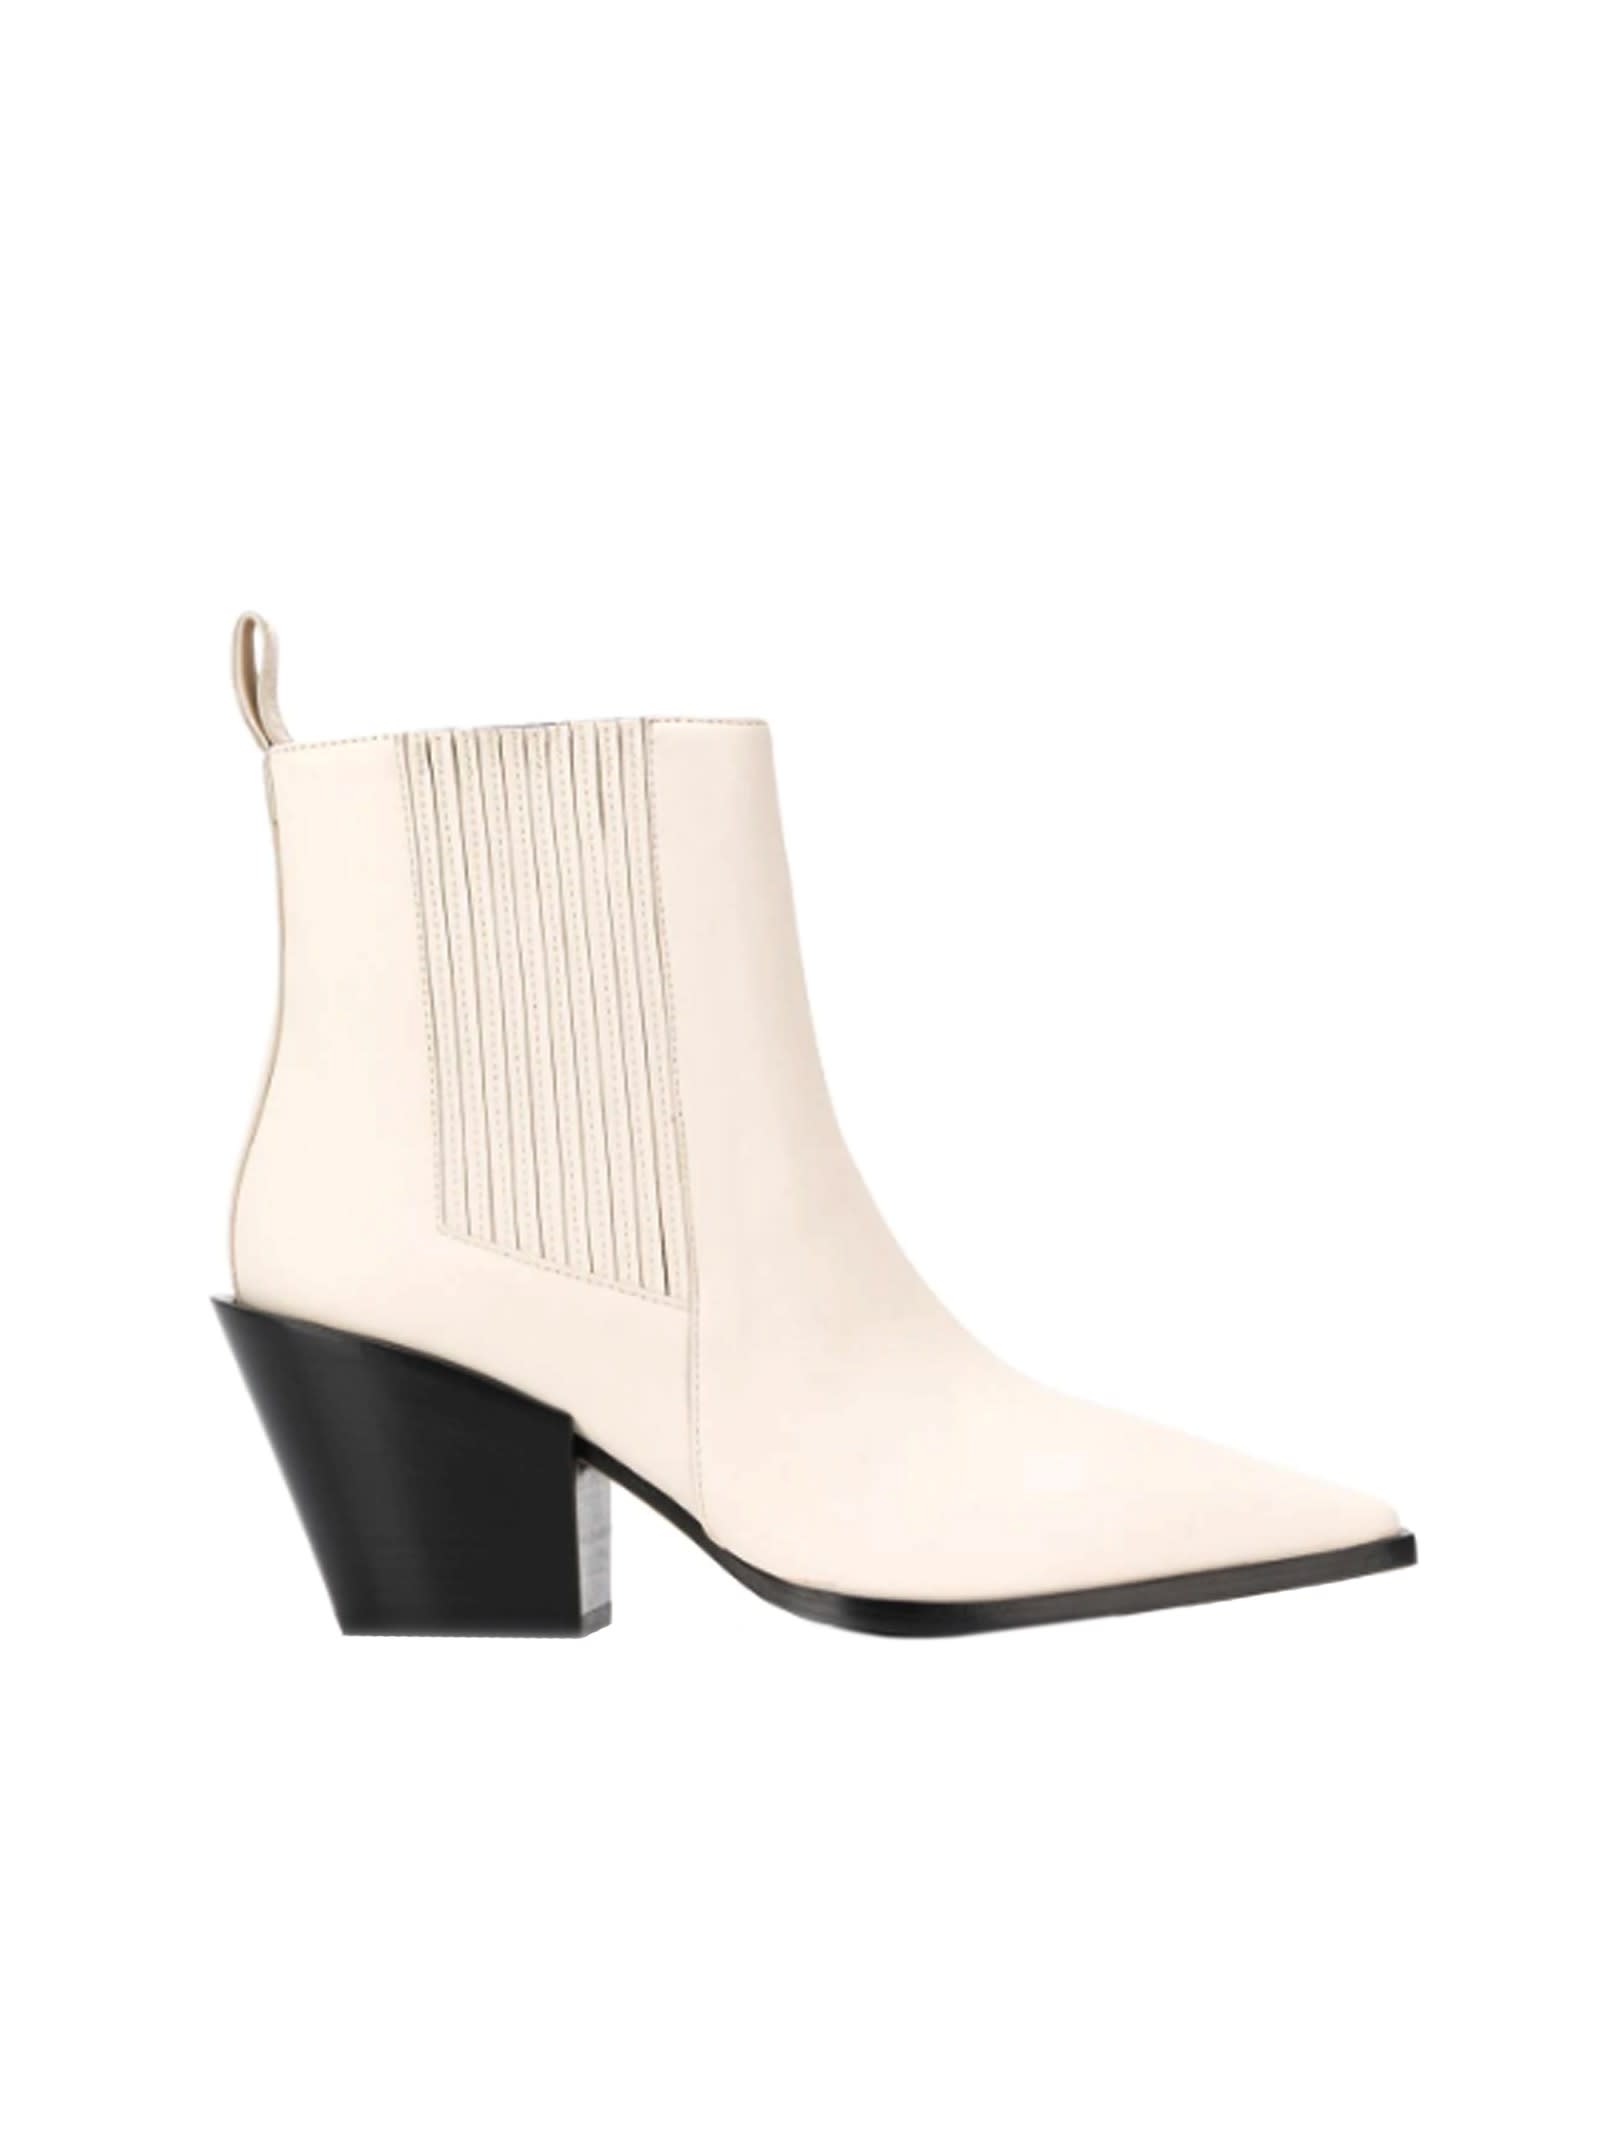 Aeyde KATE LEATHER ANKLE BOOTS